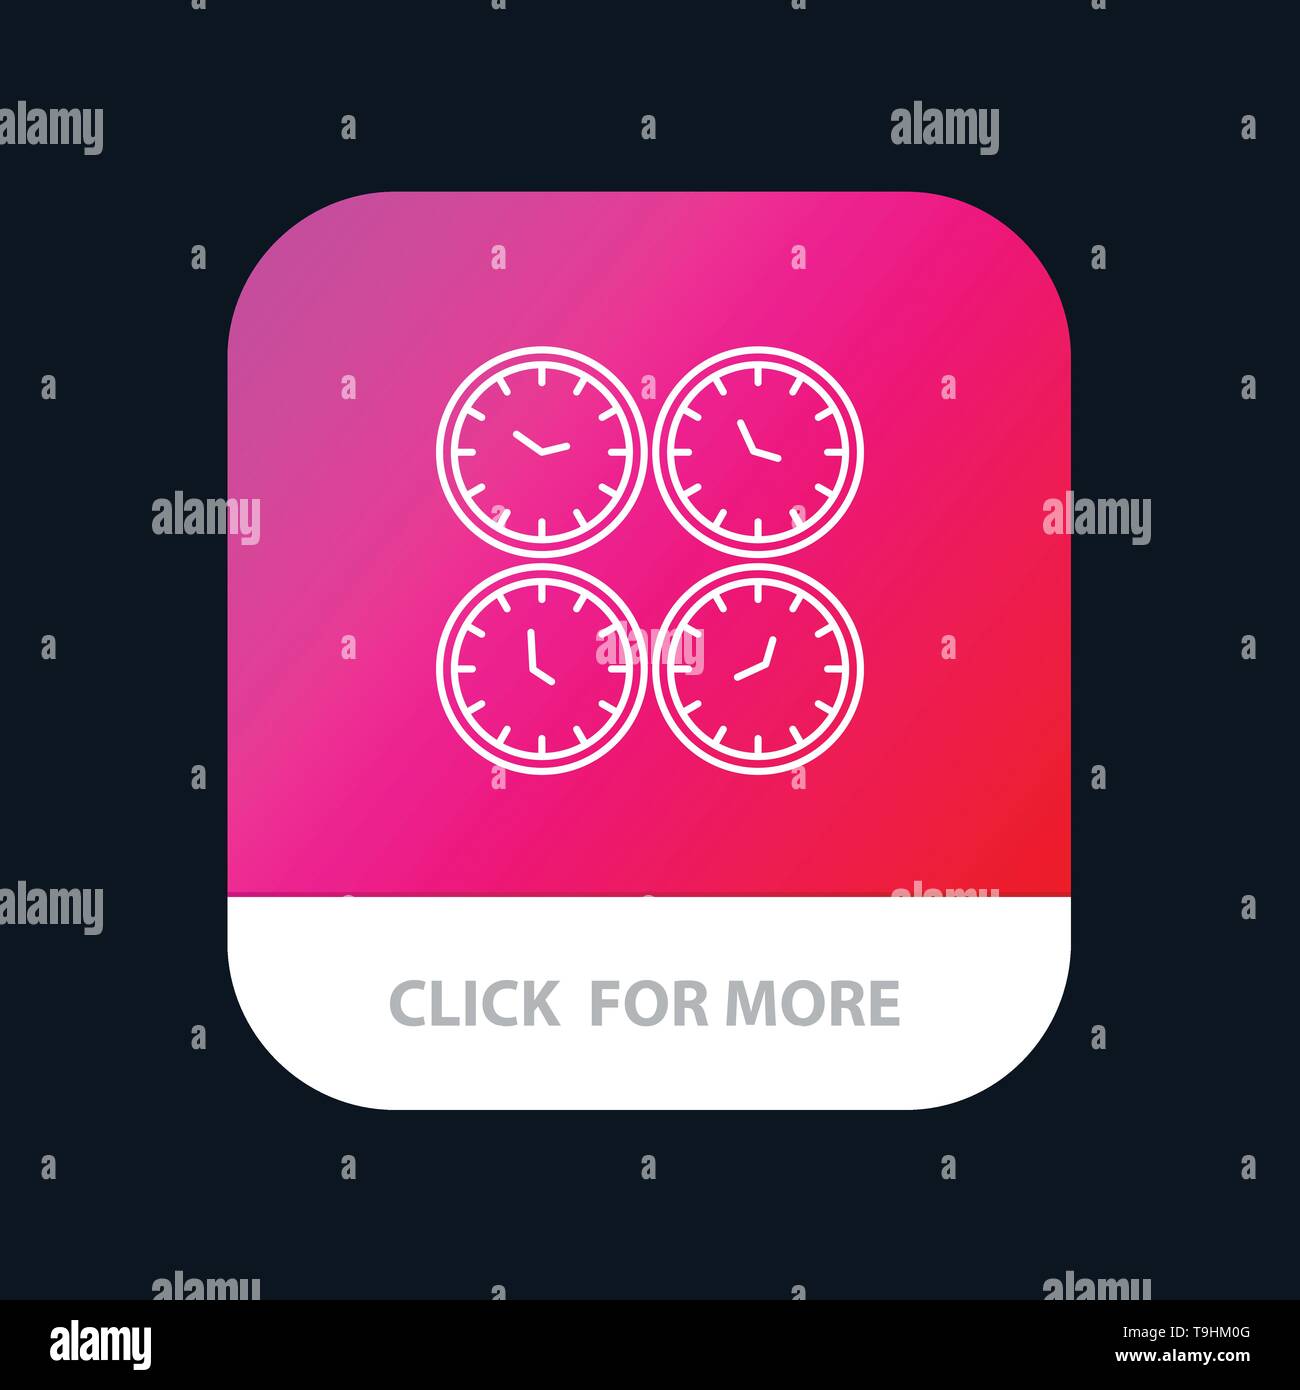 World Clock App for Android